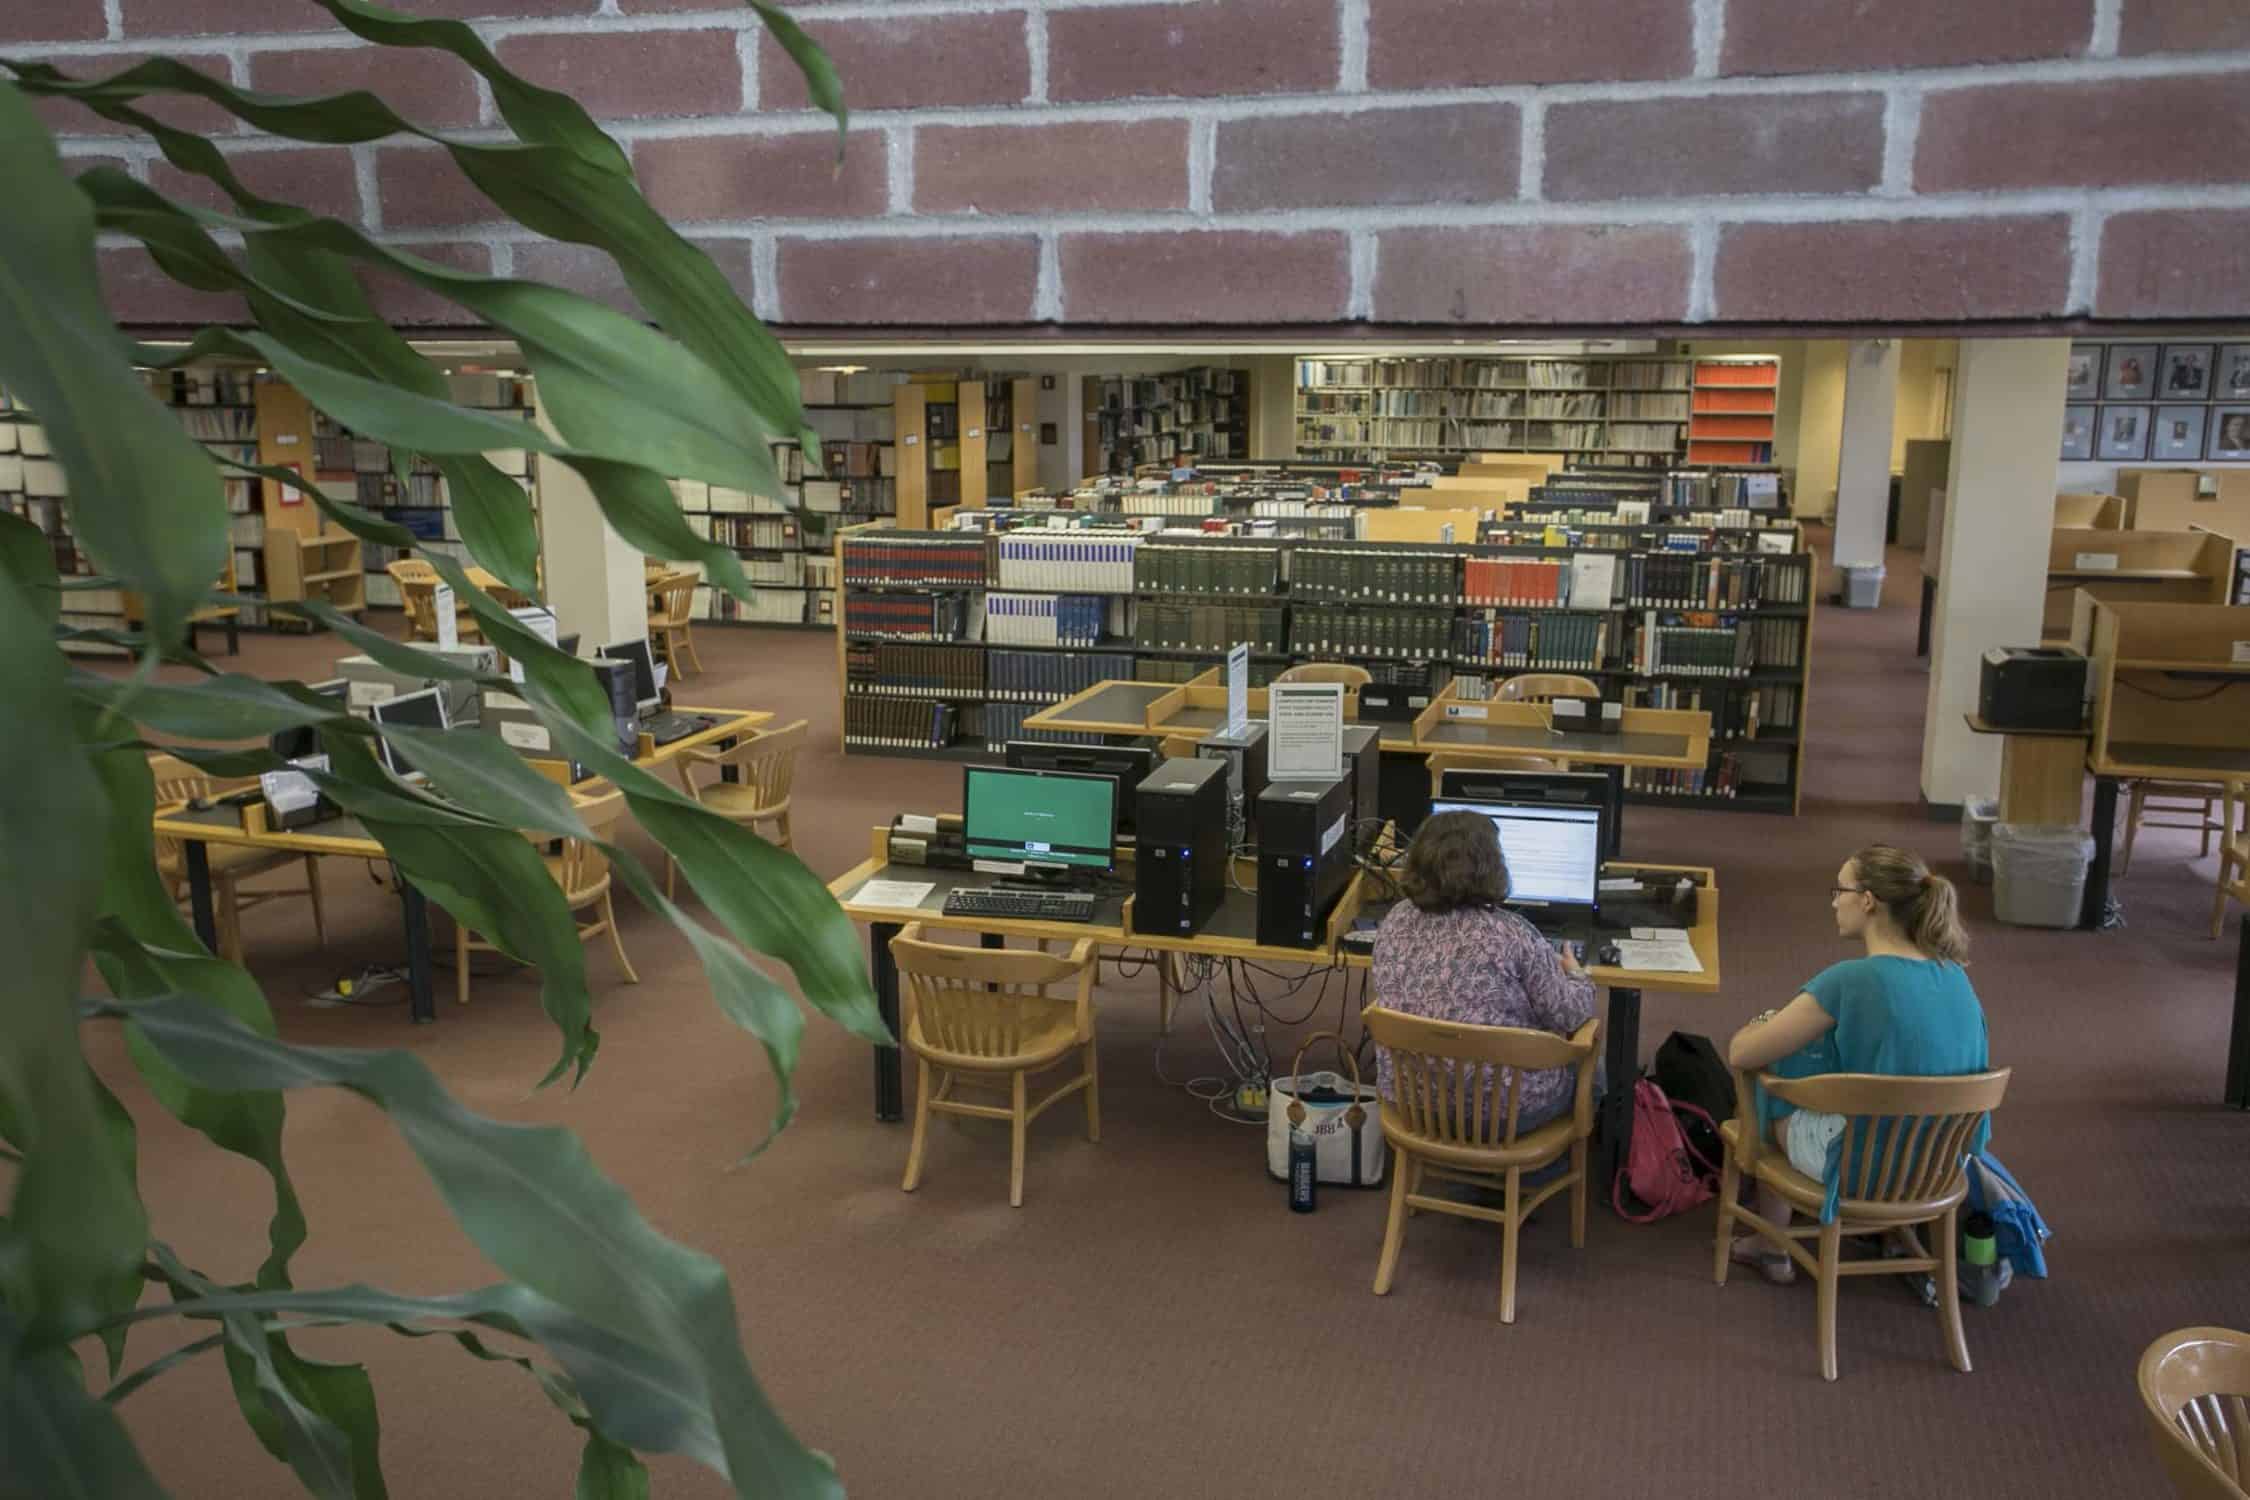 Students work at computer in library